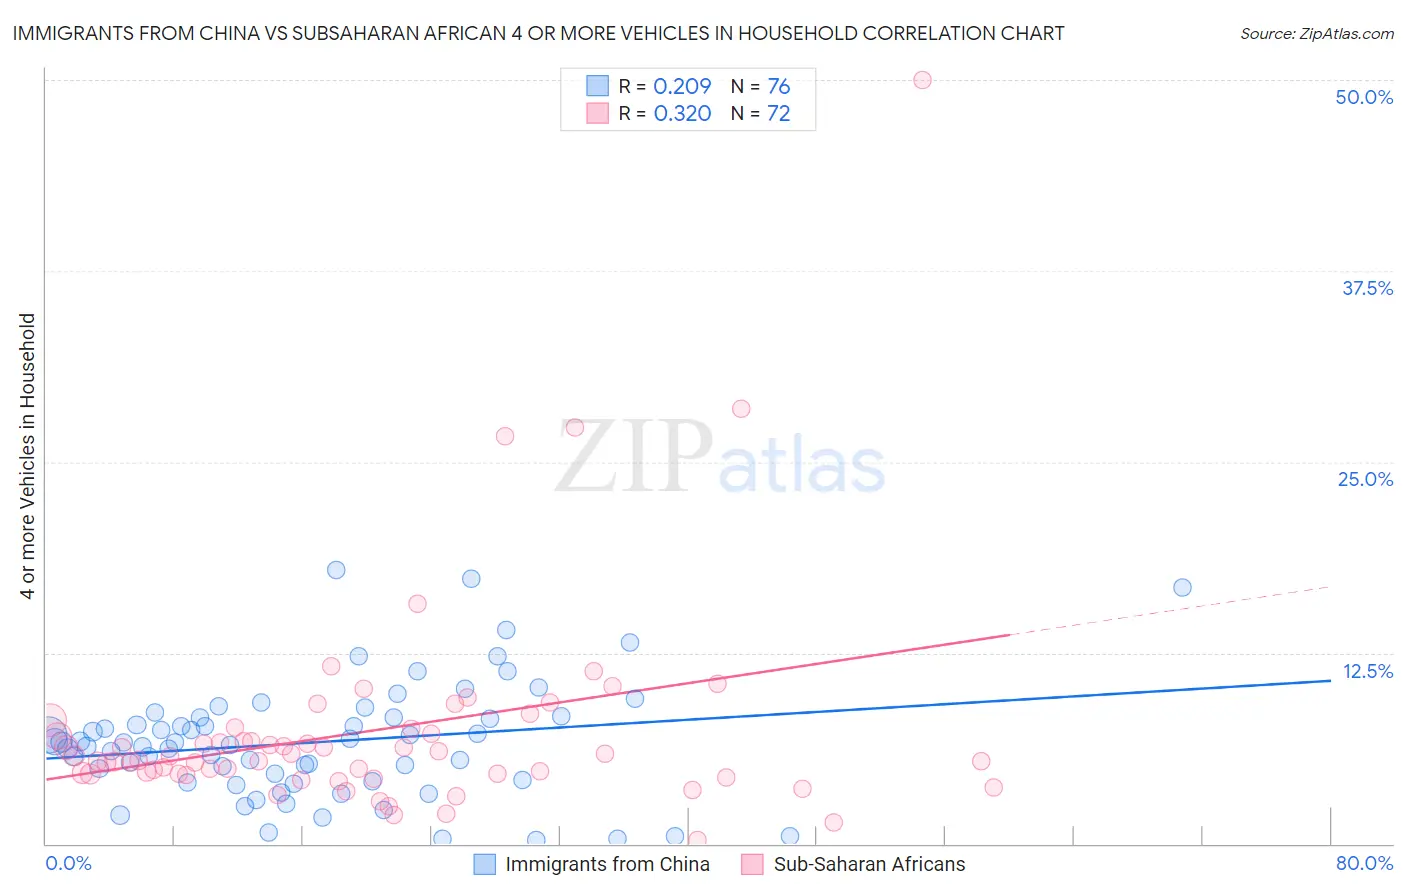 Immigrants from China vs Subsaharan African 4 or more Vehicles in Household